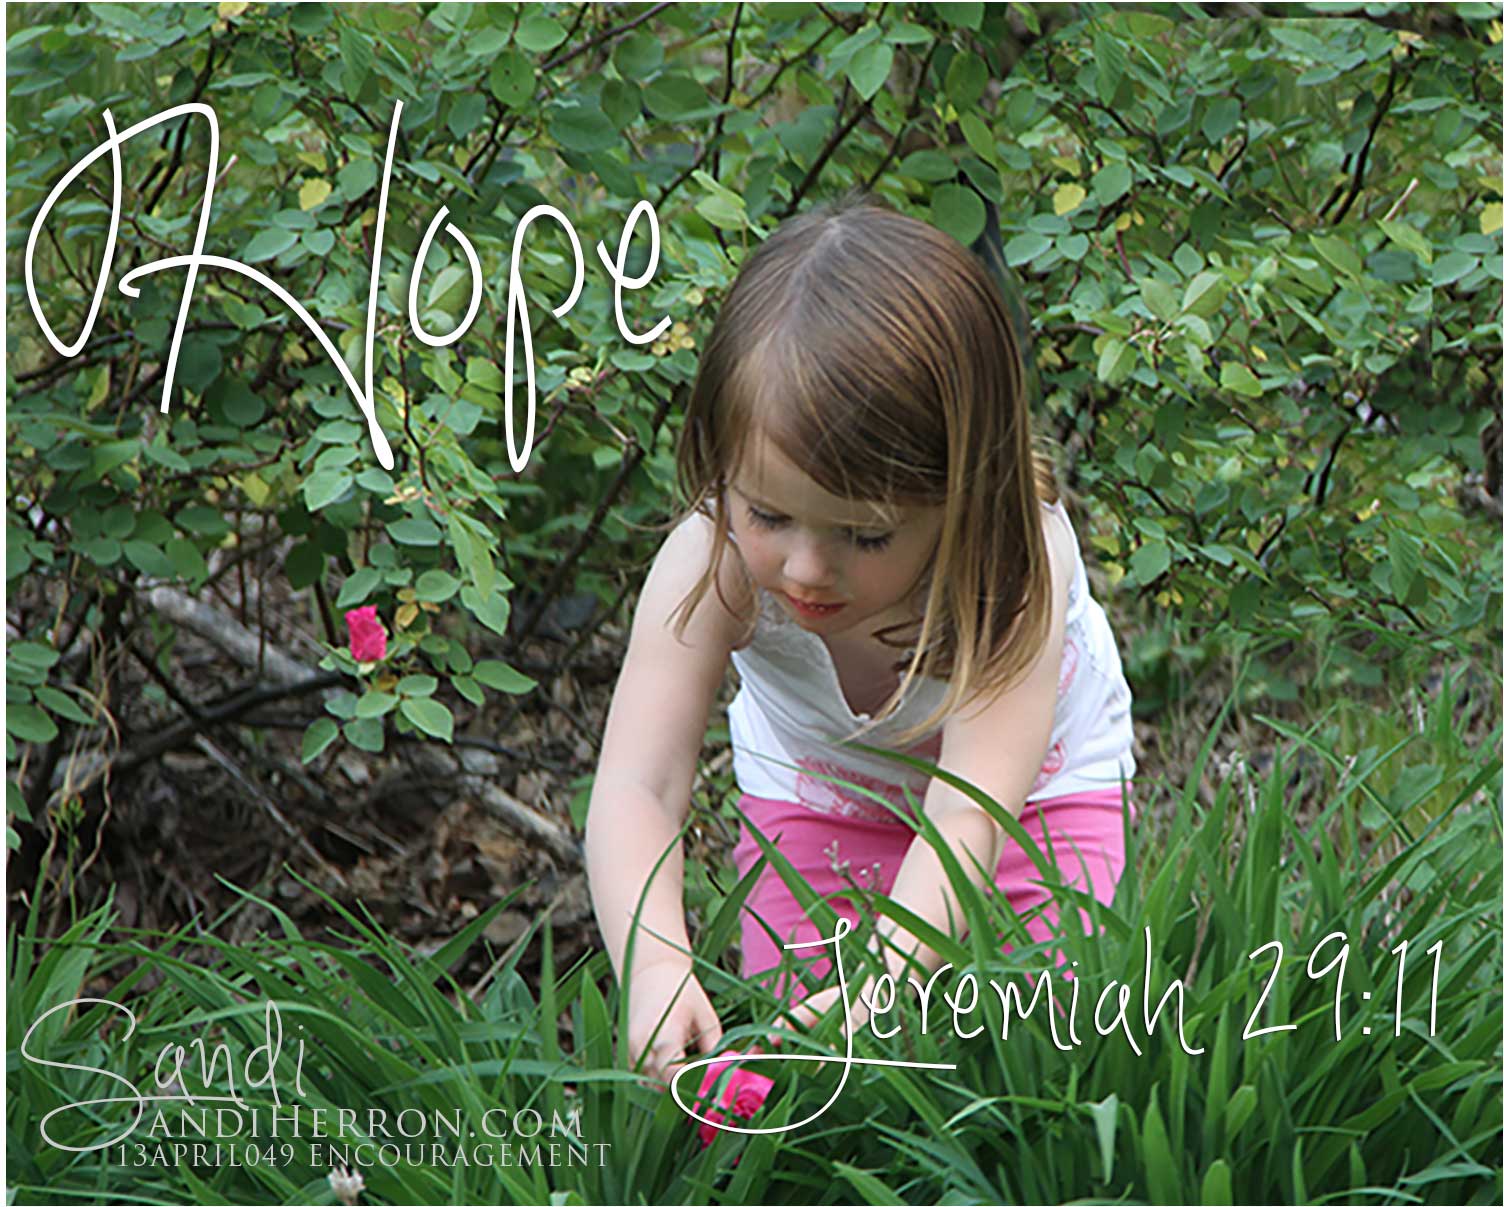 Resources-Free “Hope” Card